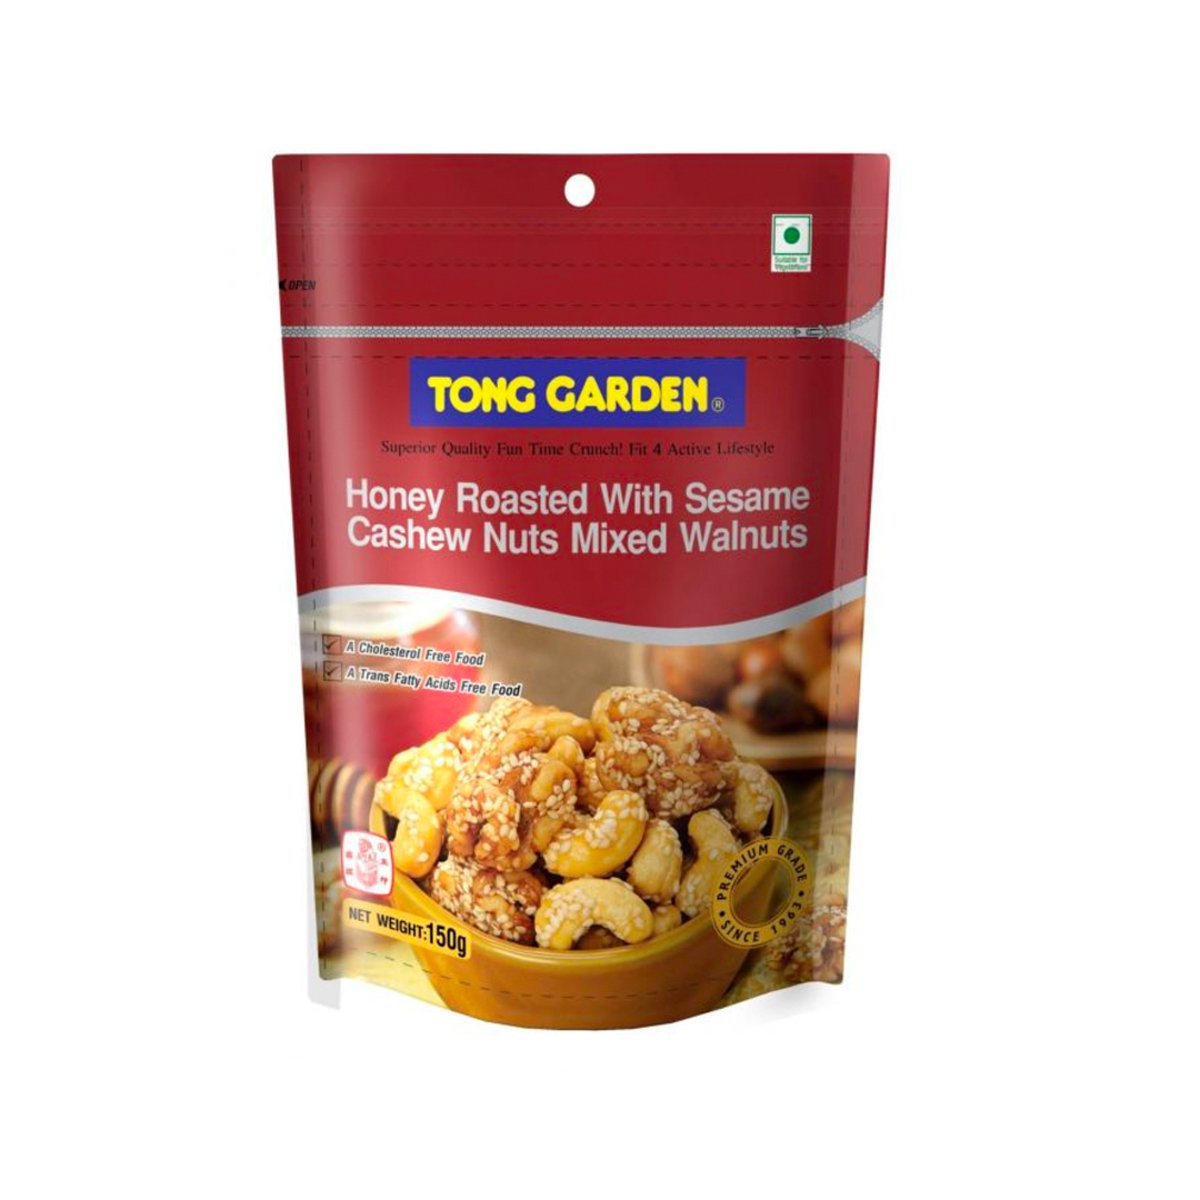 Tong Garden Honey Roasted With Sesame Cashew Nuts Mixed Walnuts 140g